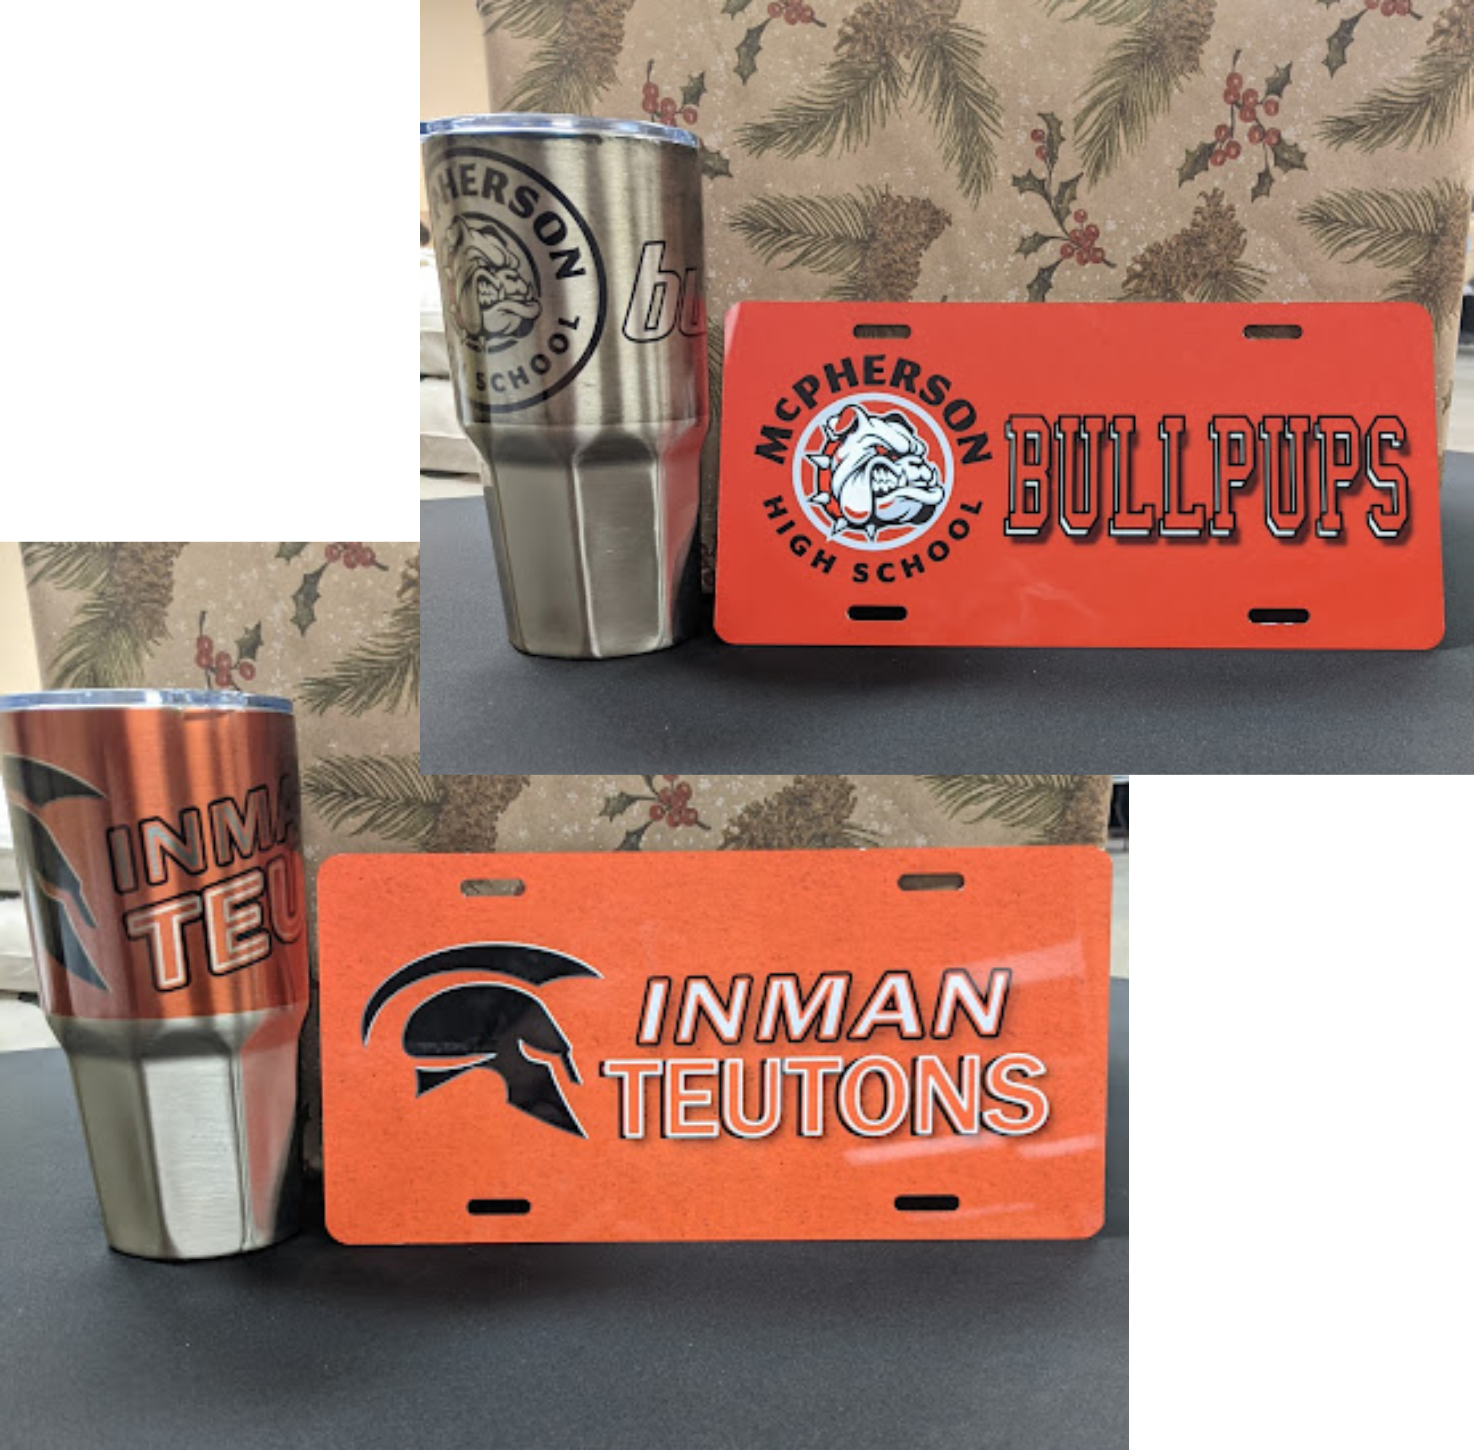 Mascots for two local high schools. Tumbler and license plate sets. Just look at those colors!!